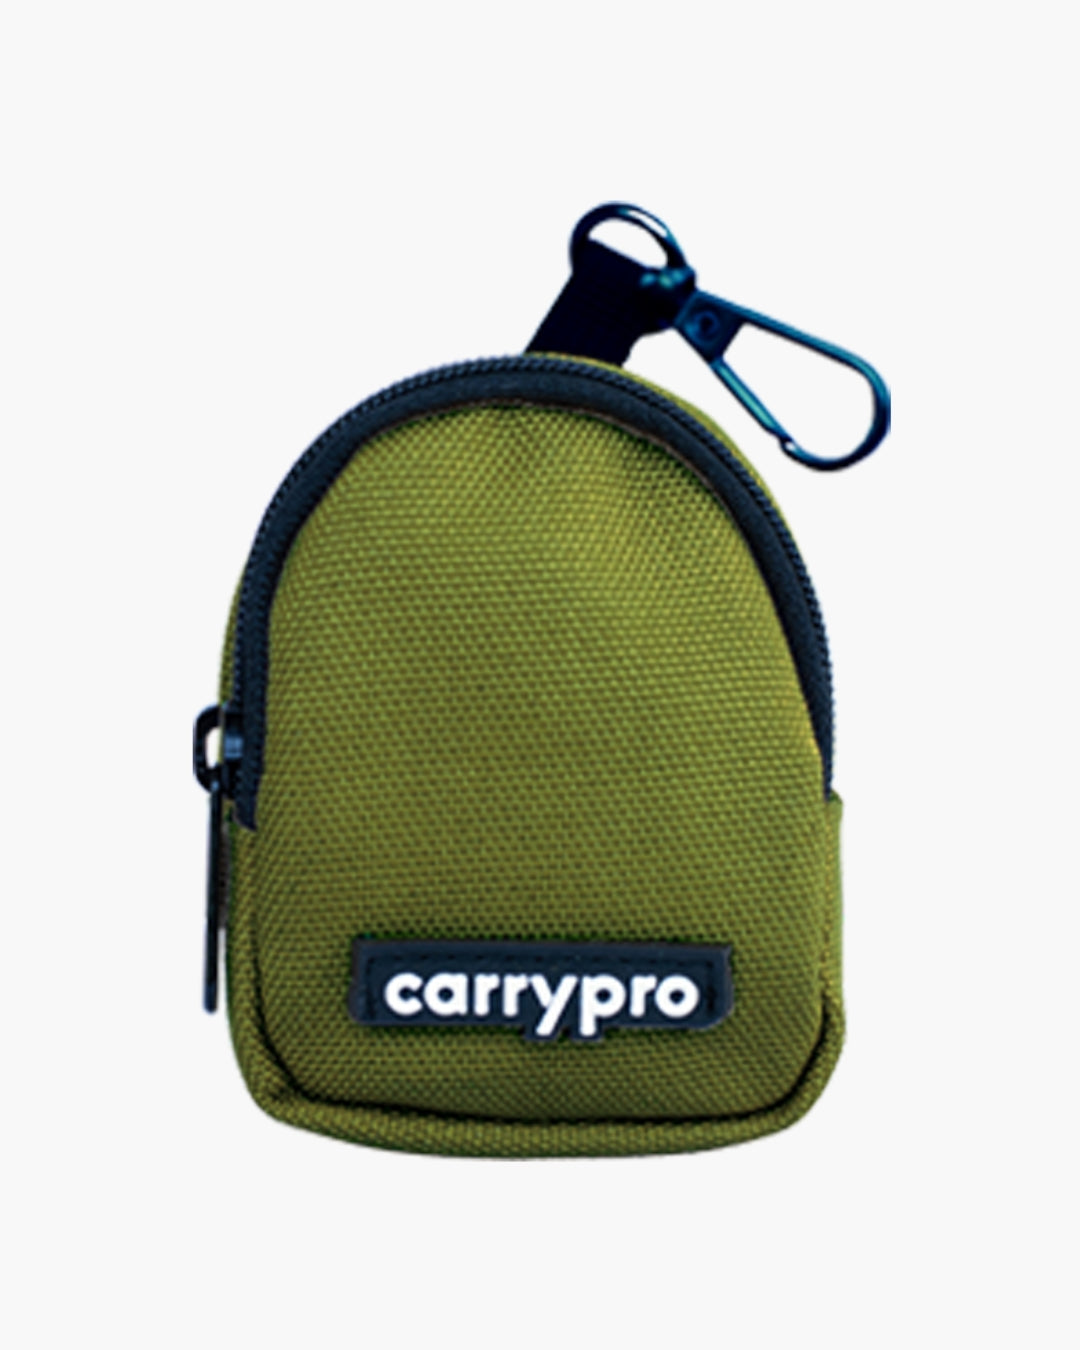 PRO Coin pouch